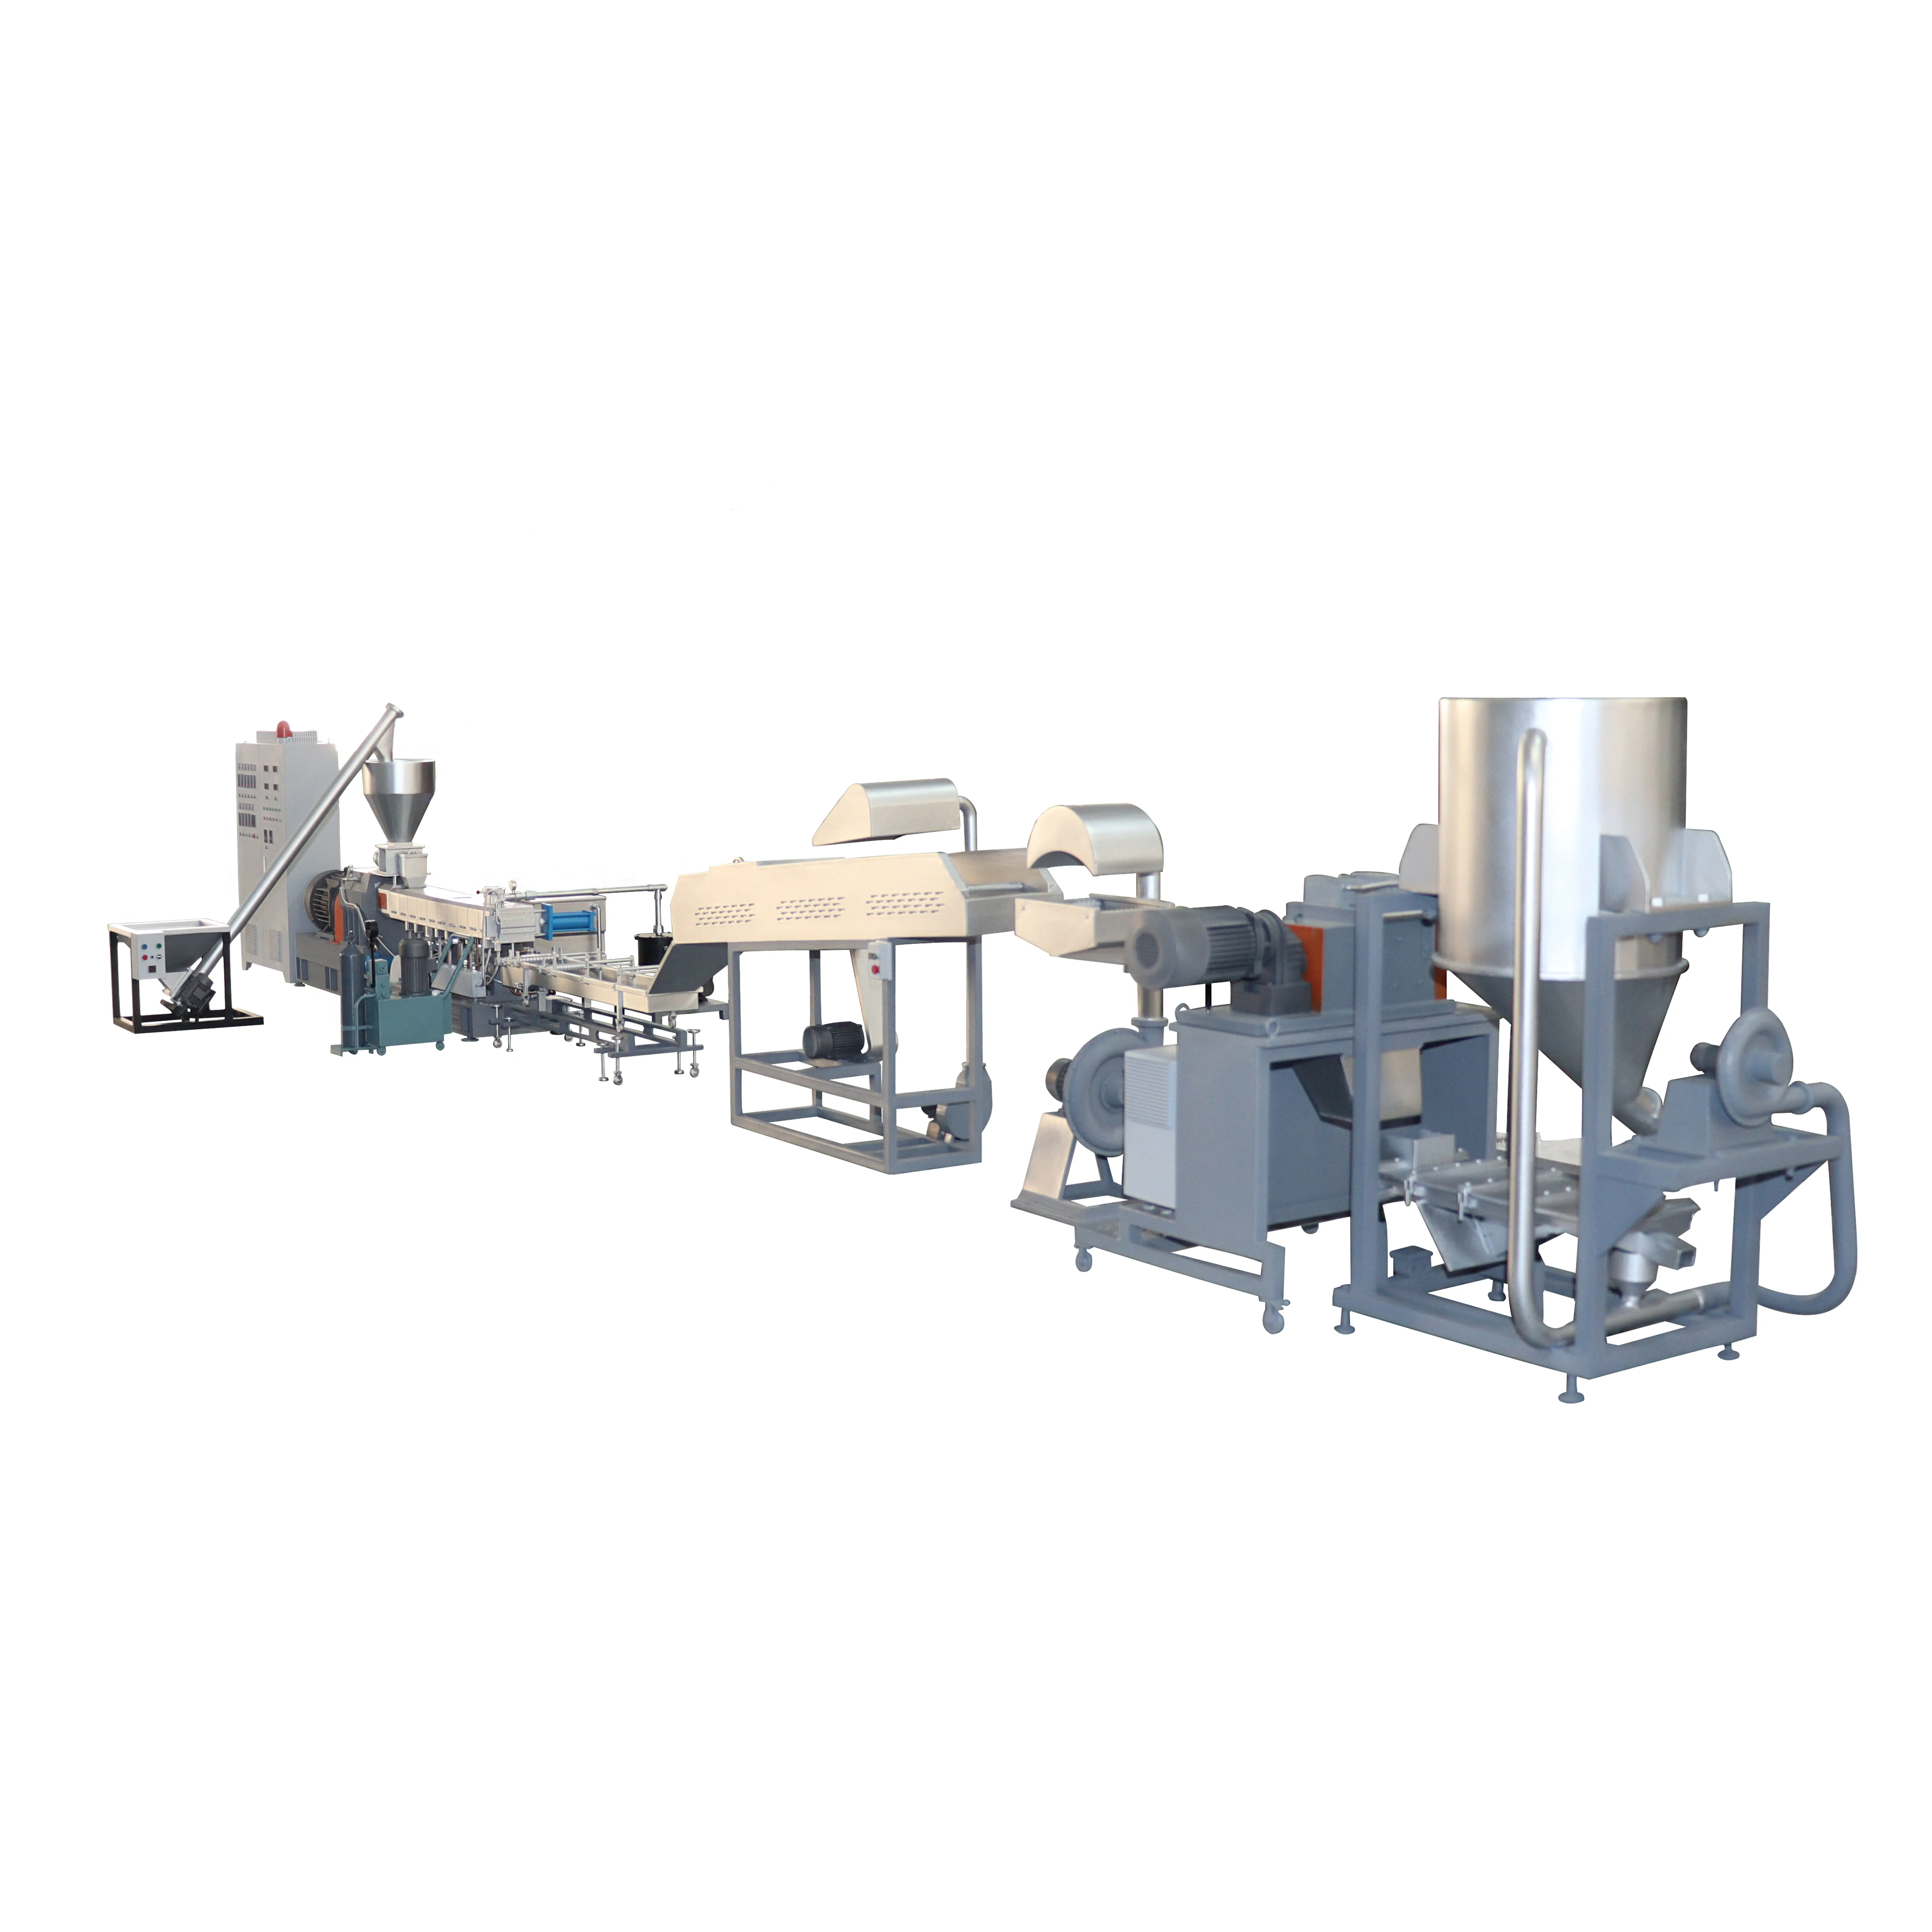 Parallel co rotating twin screw extrusion granulation production line